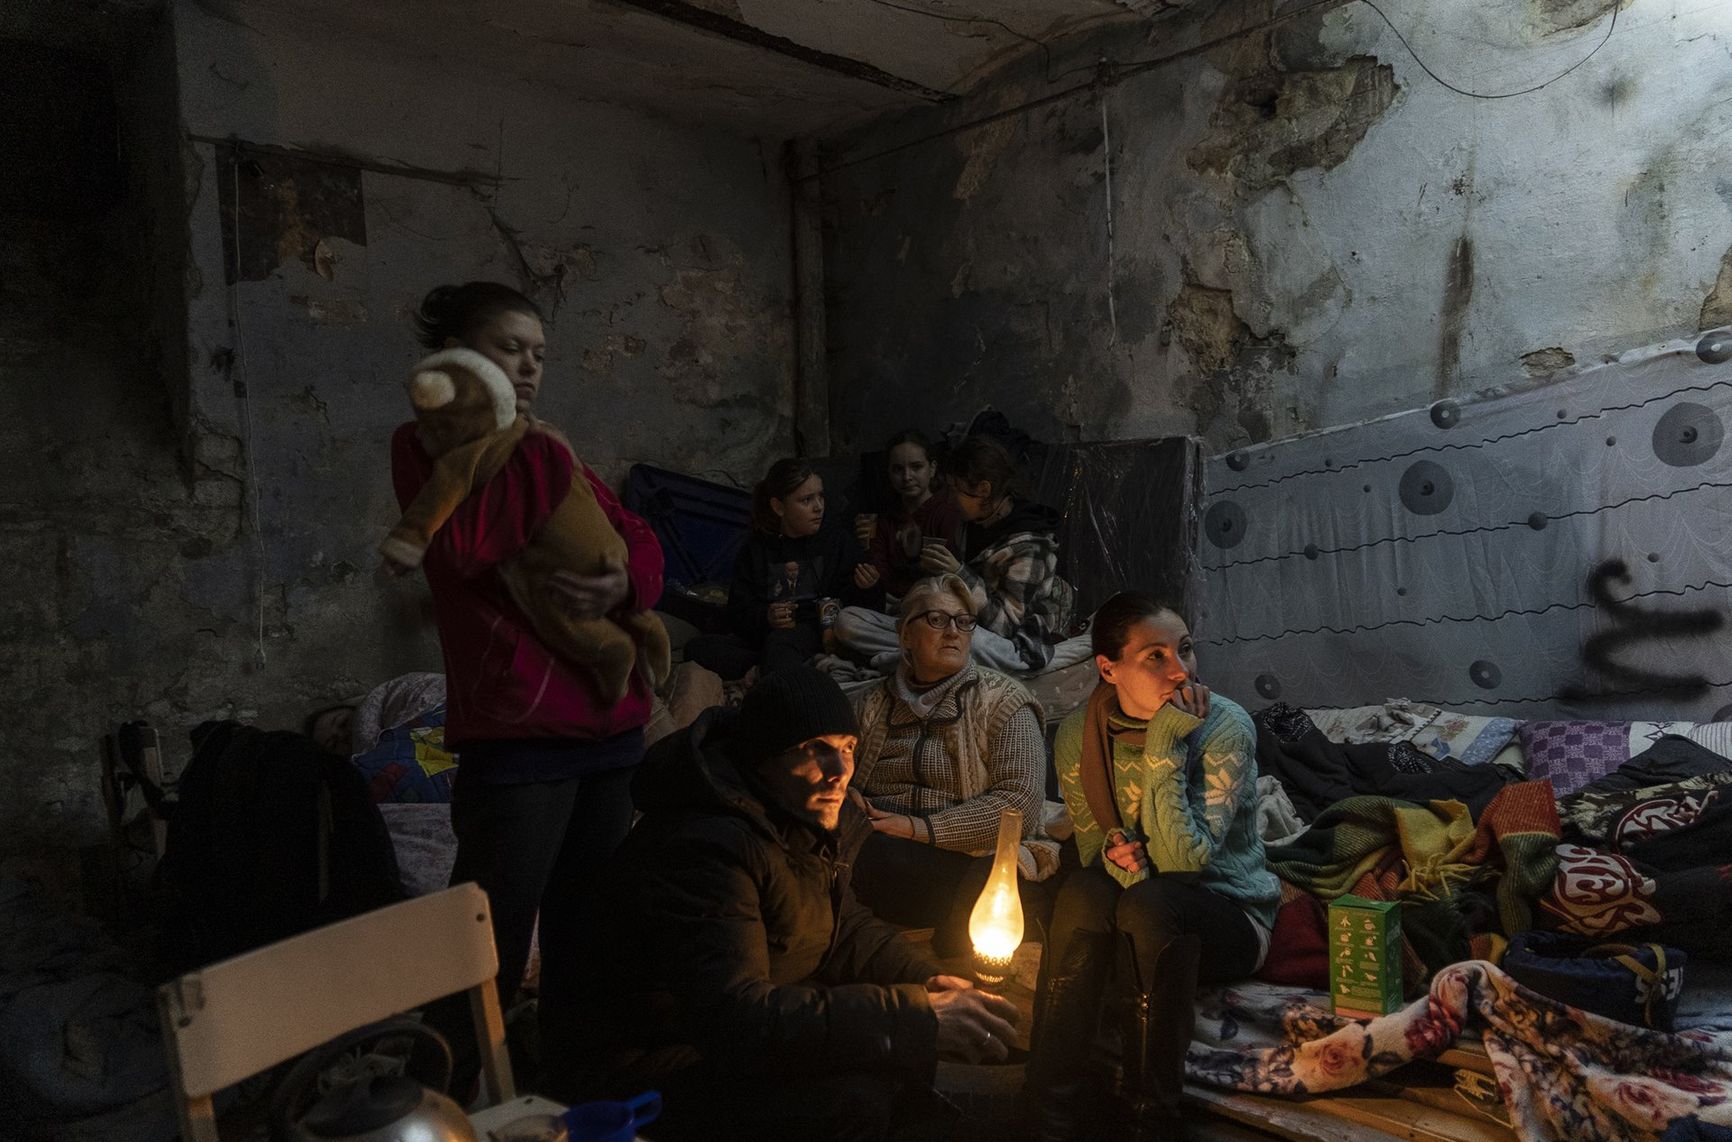 Zhanna Goma (right) and her neighbors settle in a bomb shelter in Mariupol, Ukraine.